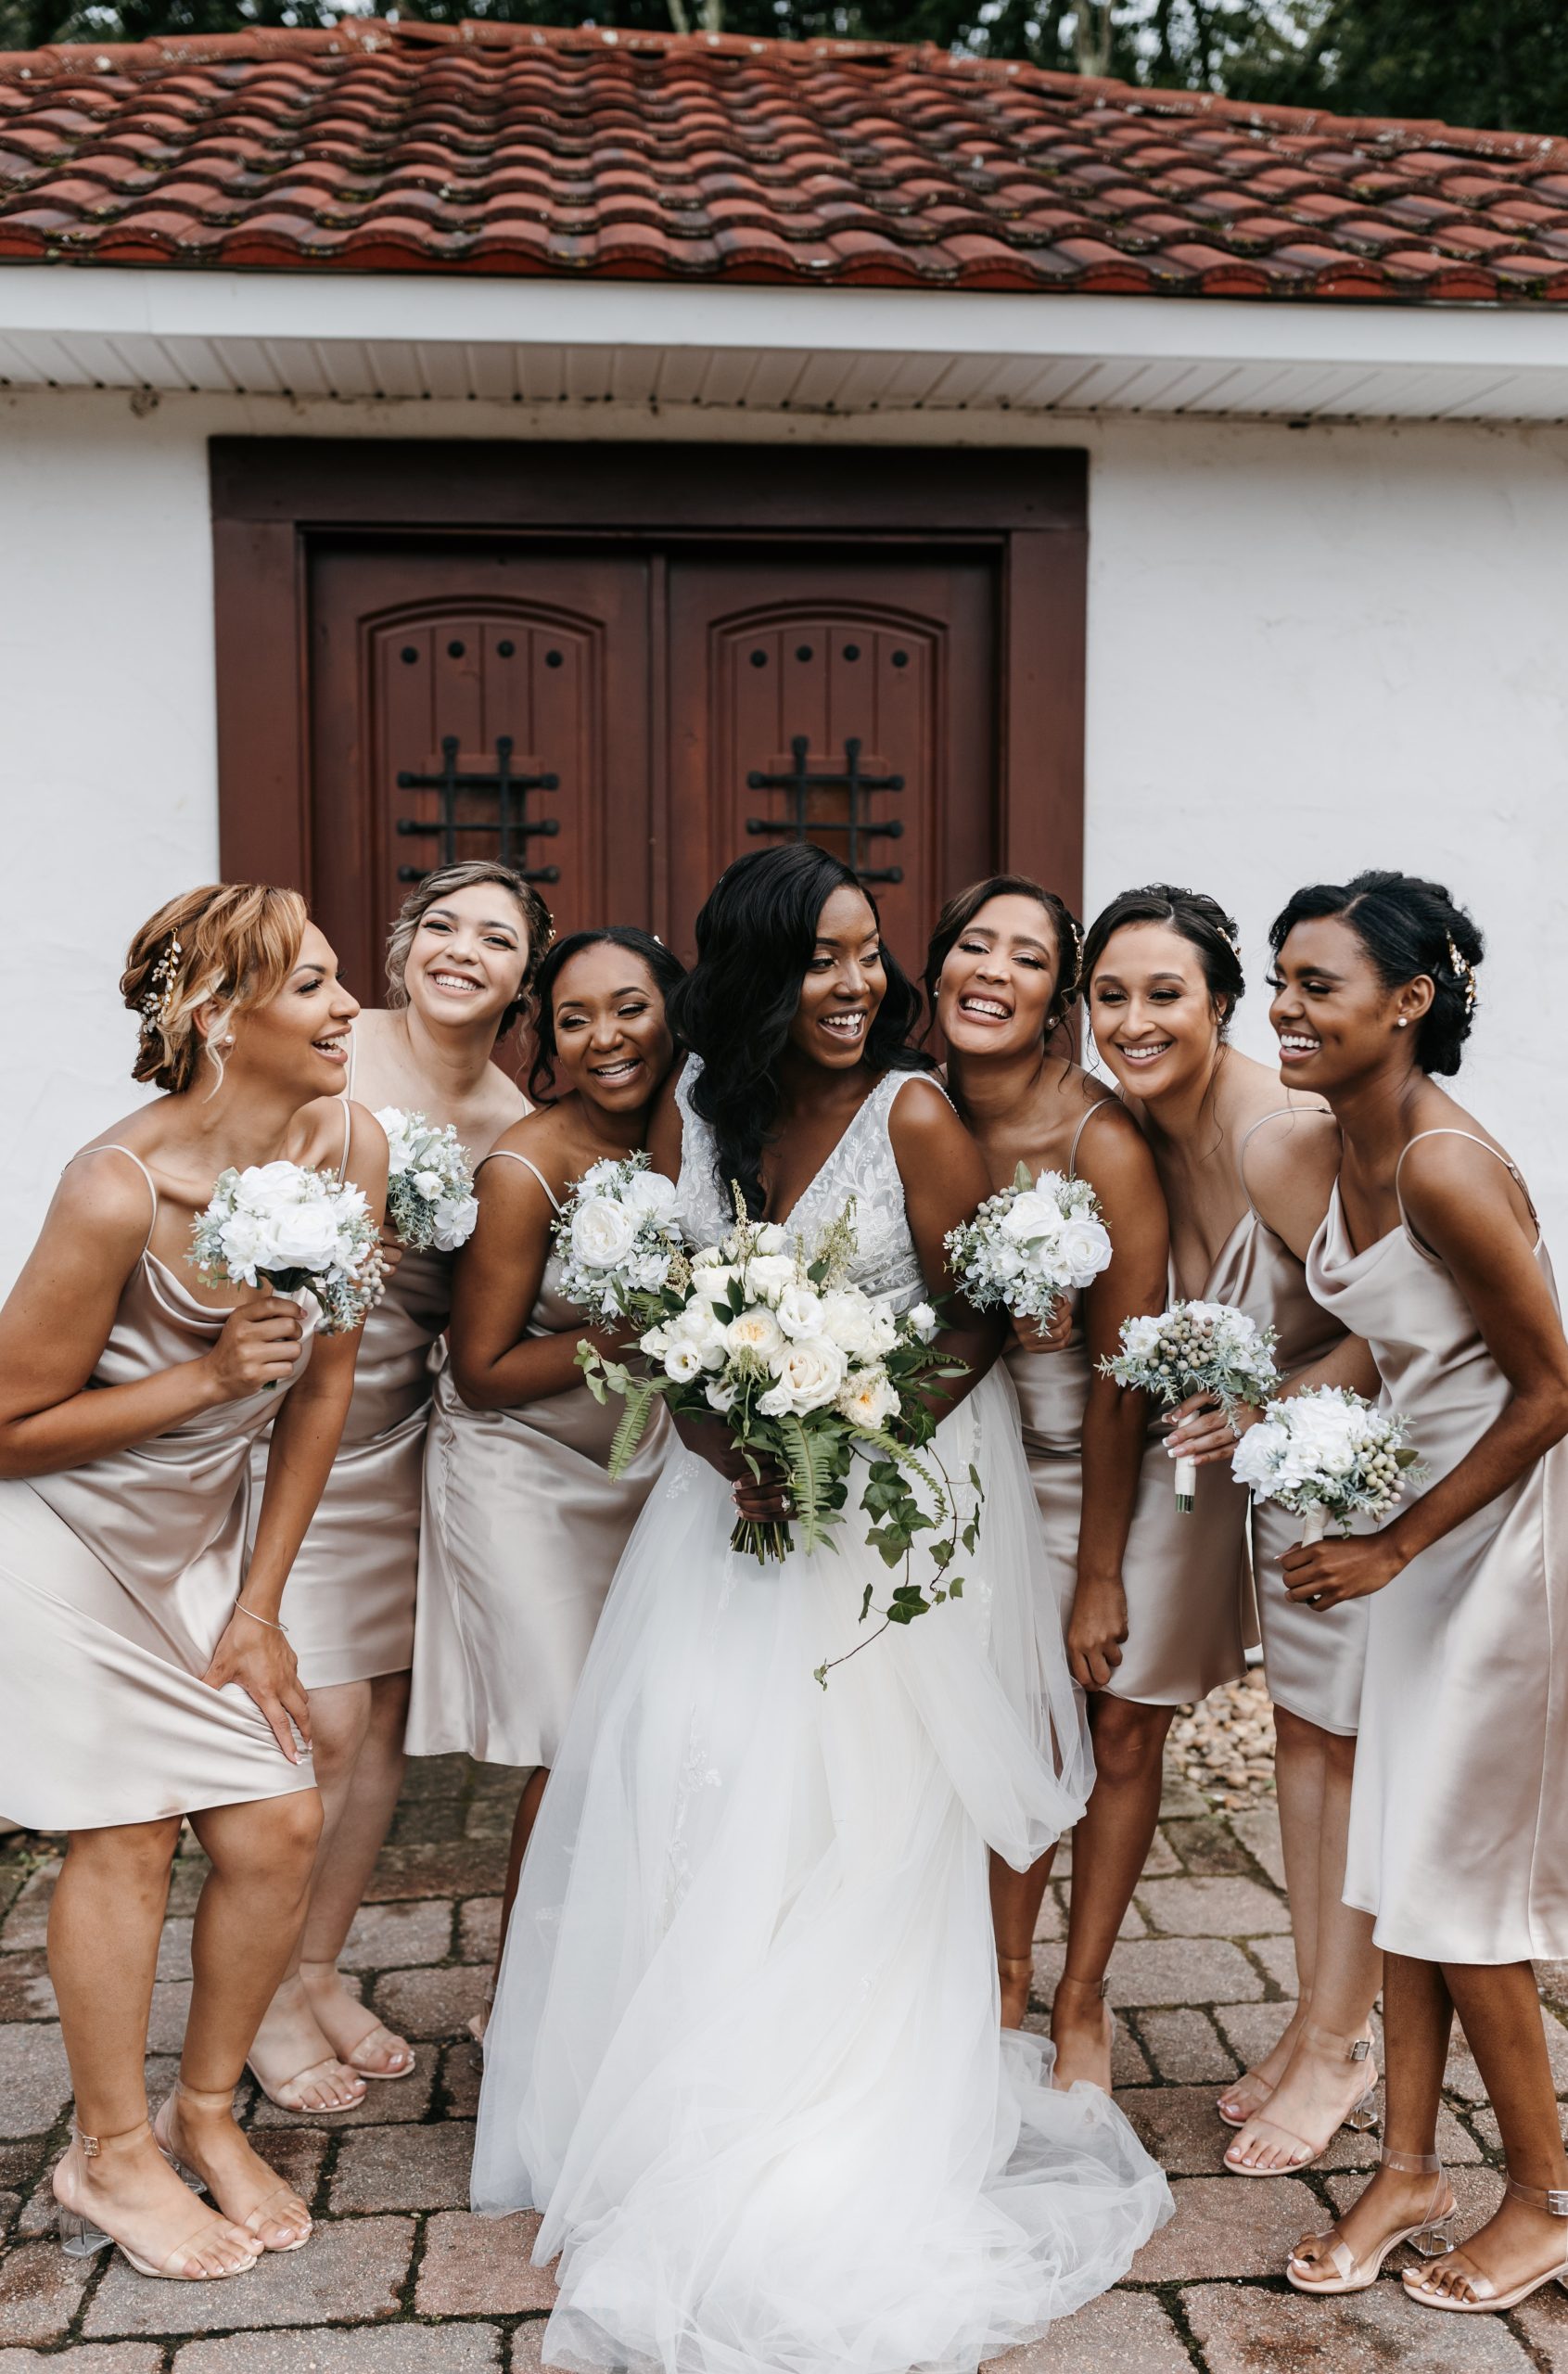 Bride Wearing A Floral A-Line Wedding Dress Called Raelynn By Rebecca Ingram With Bridesmaids In Gold